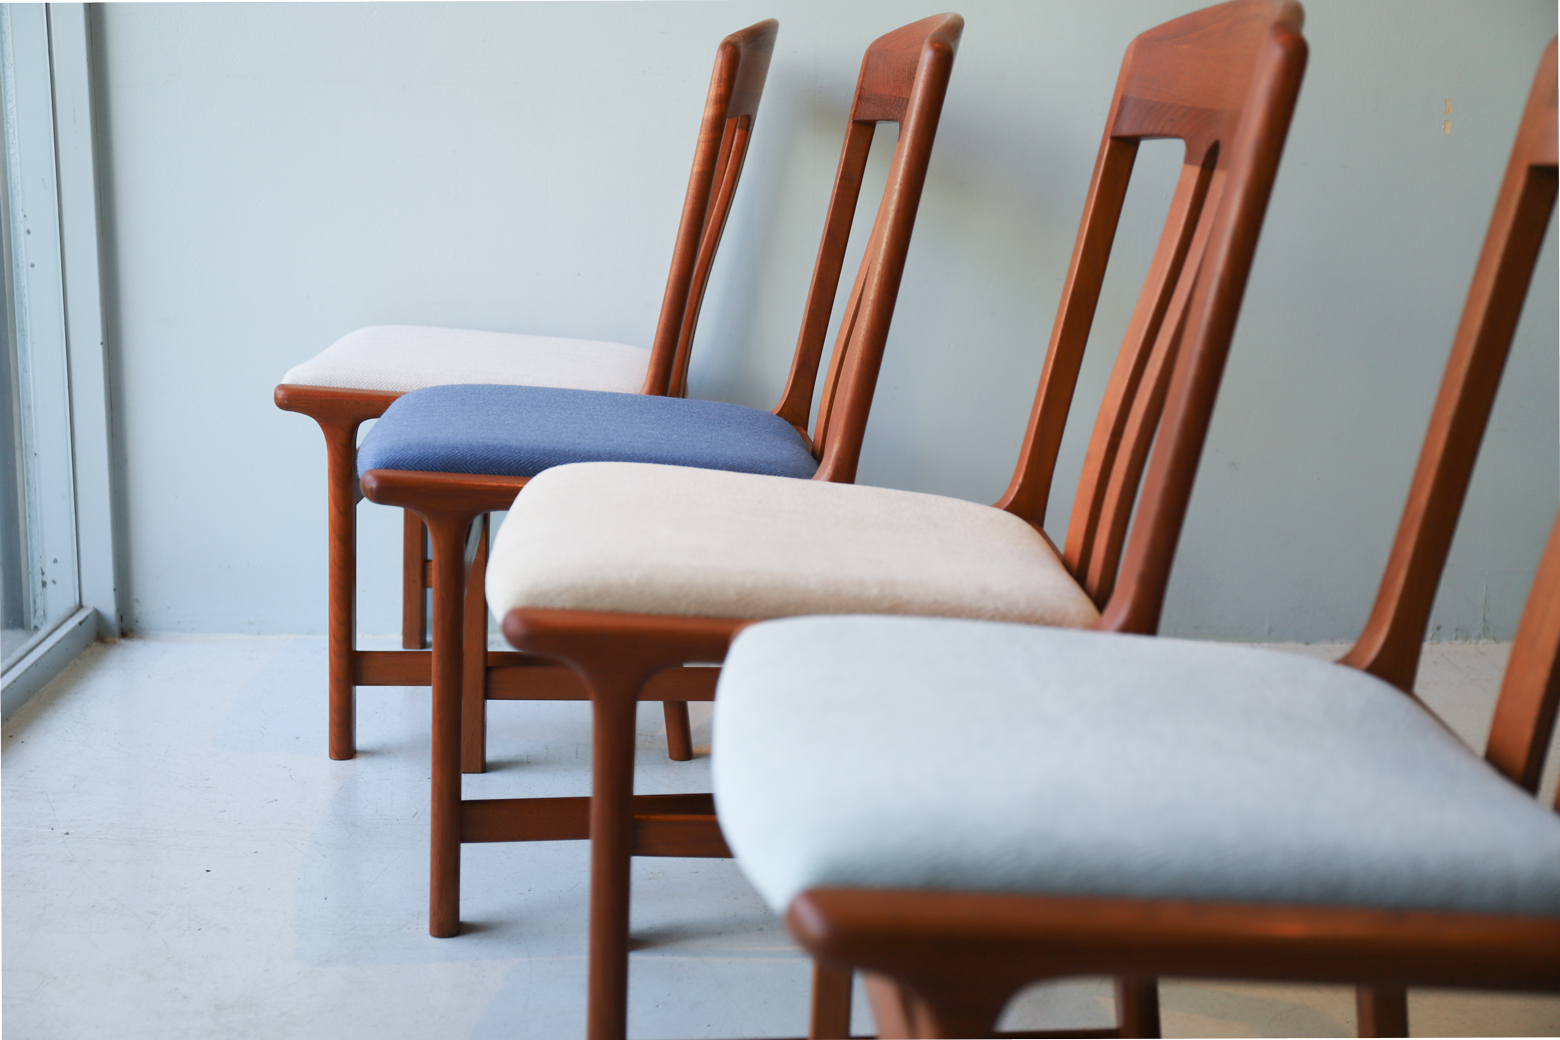 Danish Vintage L.Olsen&Son Dining Chair Re-Covering/デンマーク ヴィンテージ L.オルセン&サン ダイニング チェア 北欧家具 張替済み